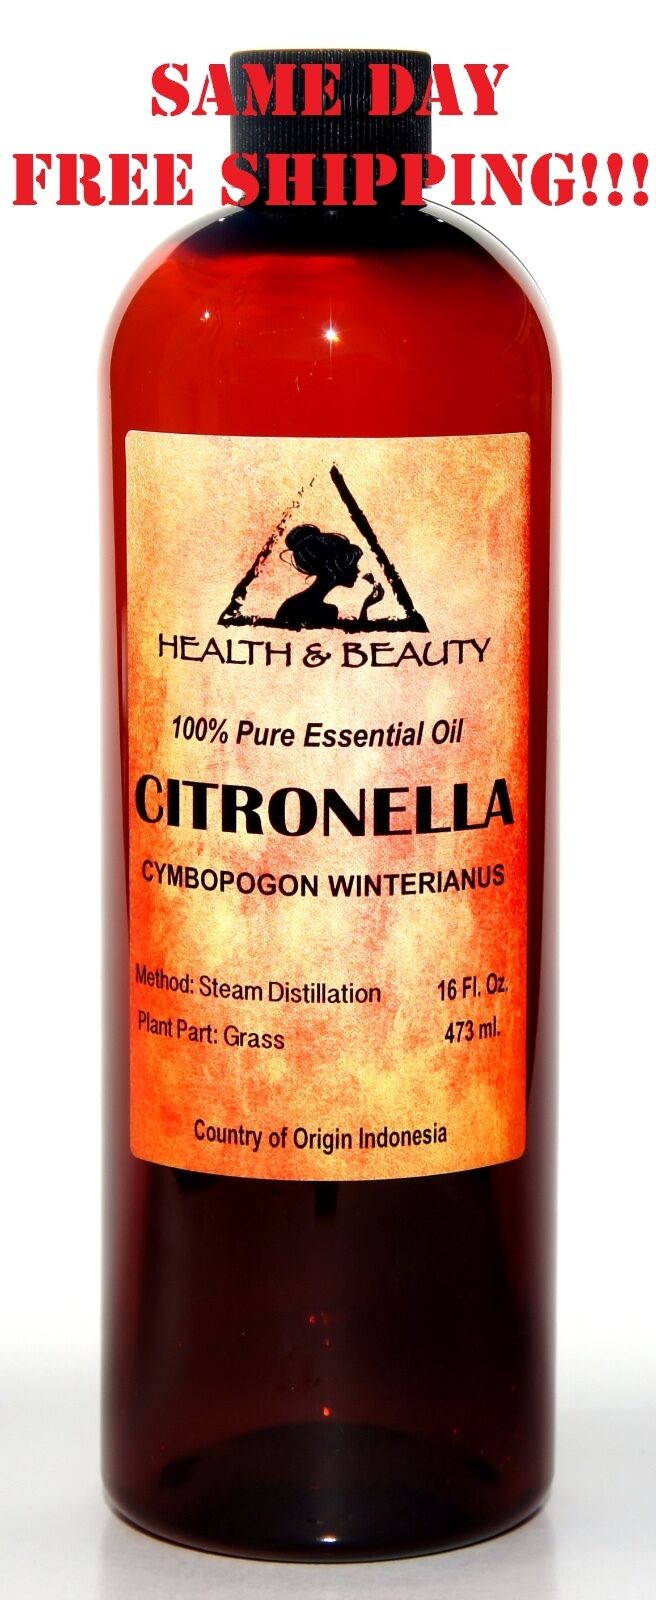 CITRONELLA ESSENTIAL OIL ORGANIC Online limited product NATURAL AROMATHERAPY Max 78% OFF 100% PURE